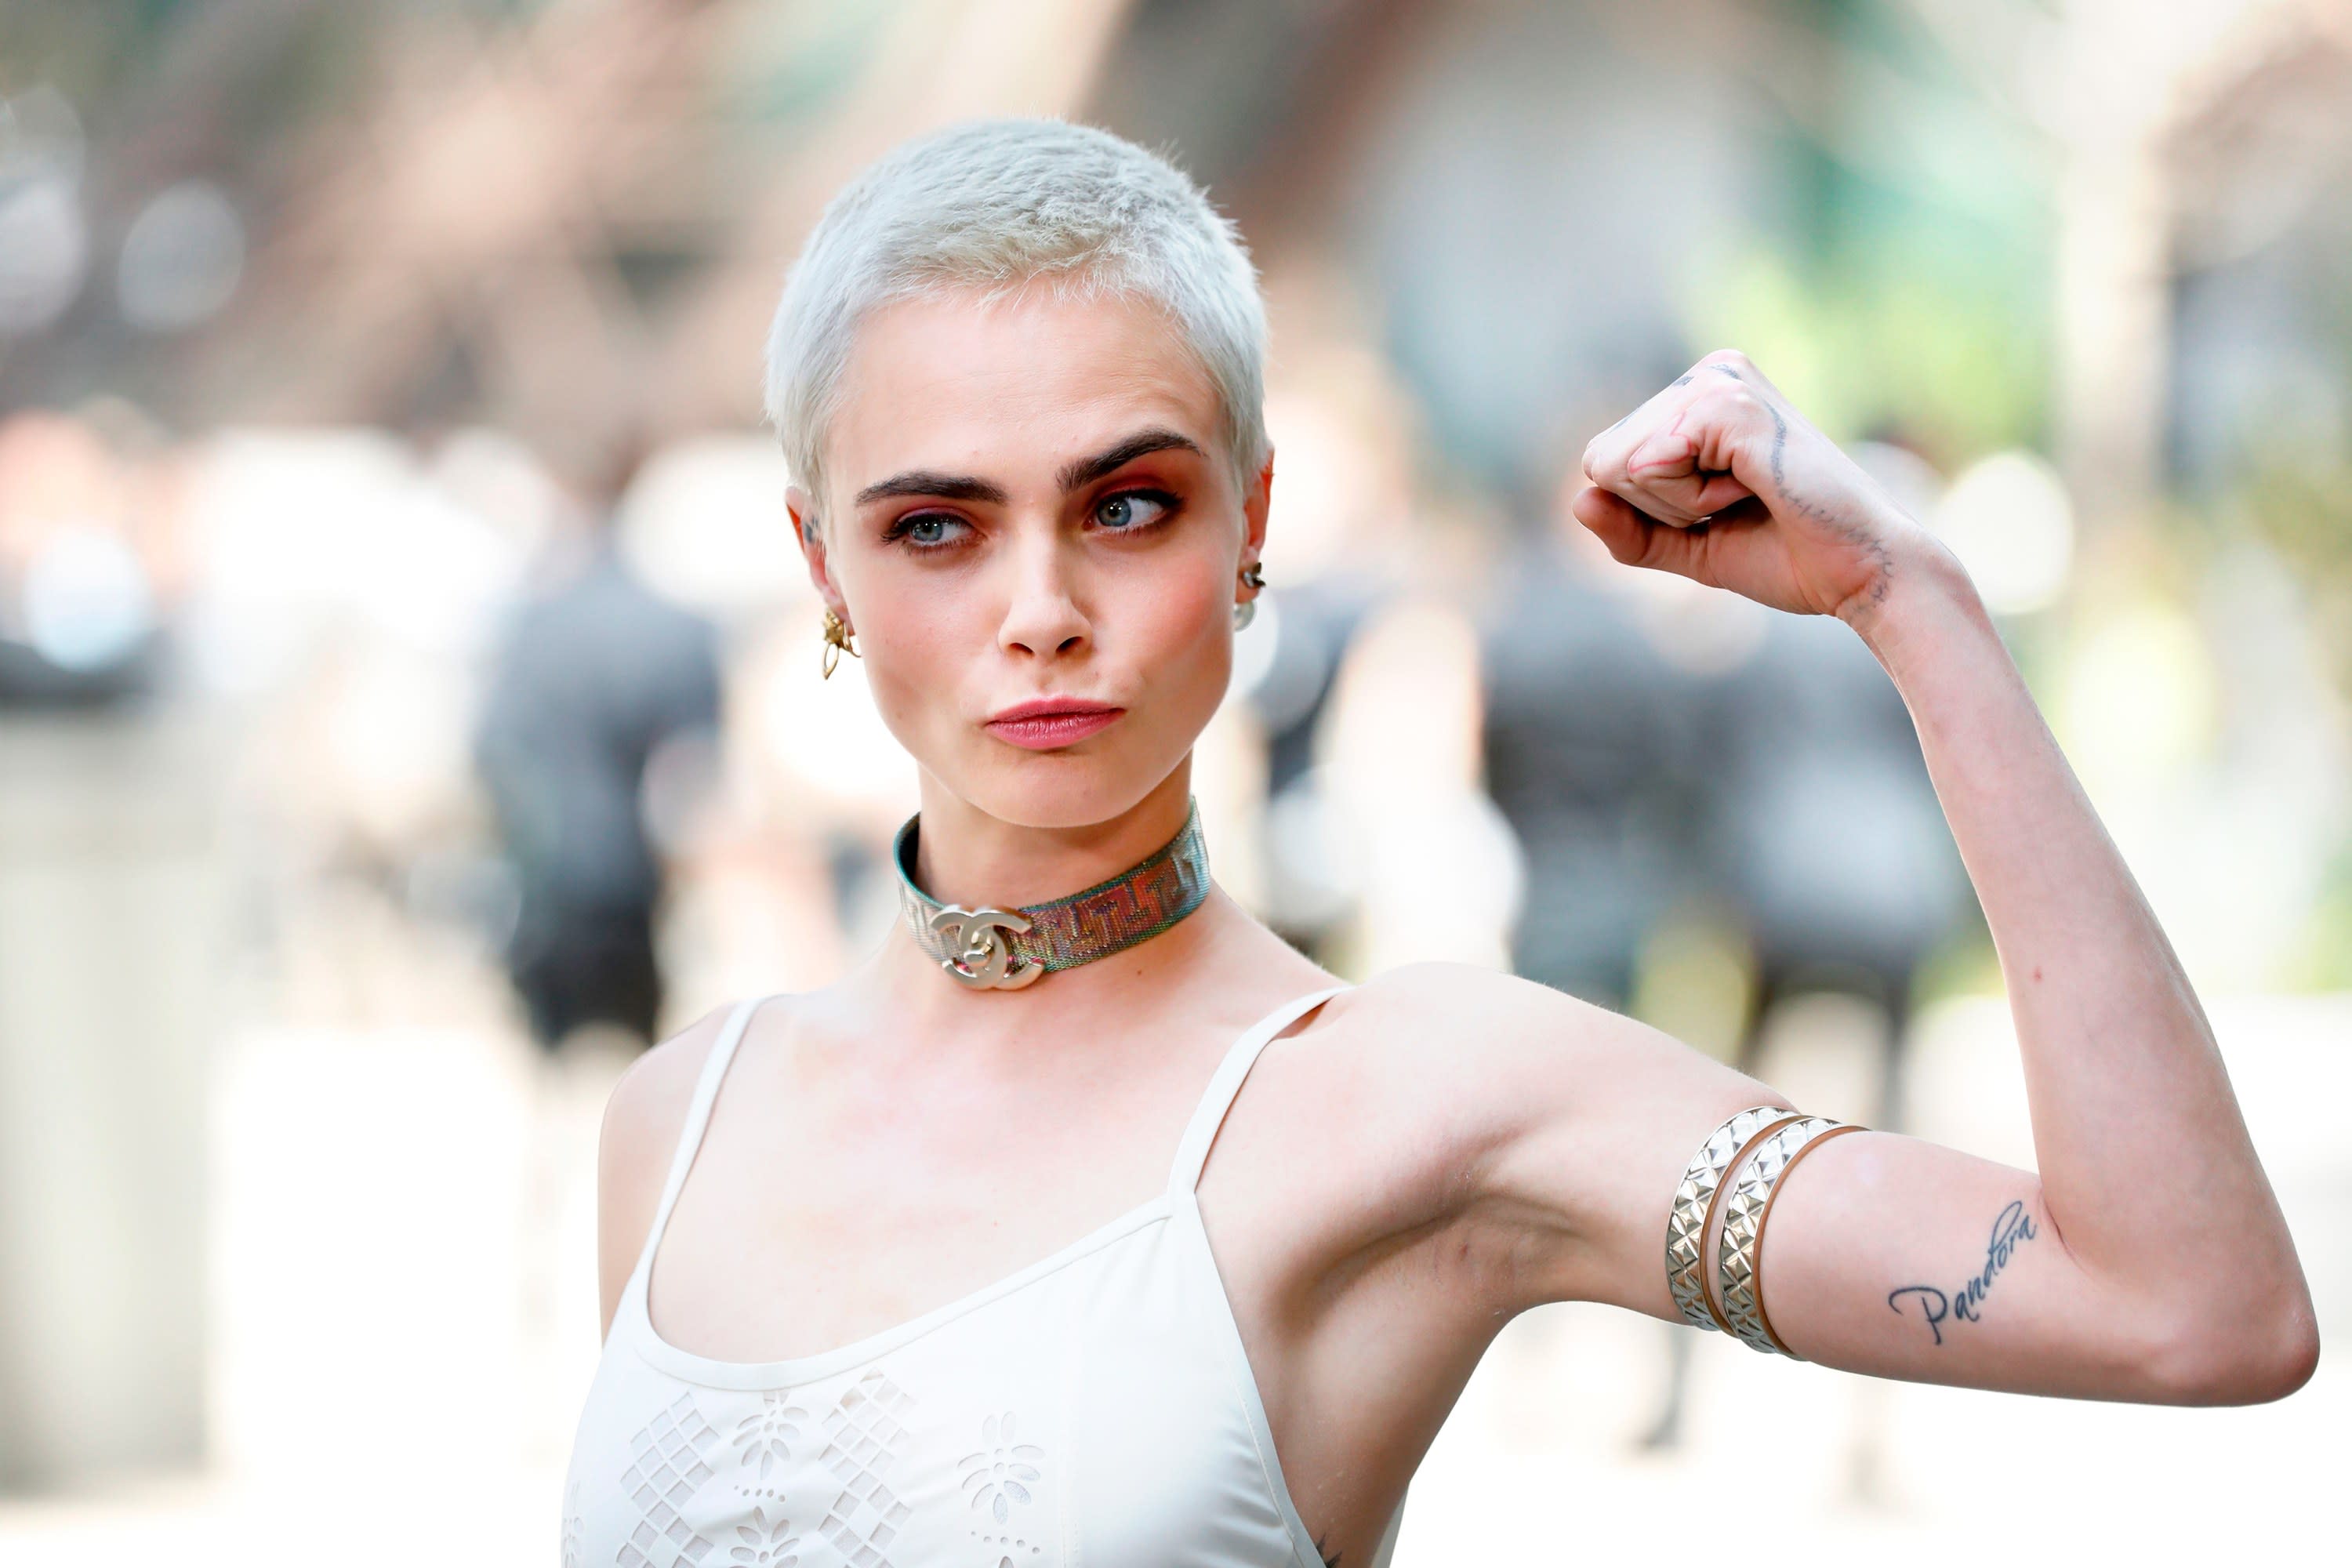 Should You Shave Your Head to Make Your Hair Grow Back Healthier?